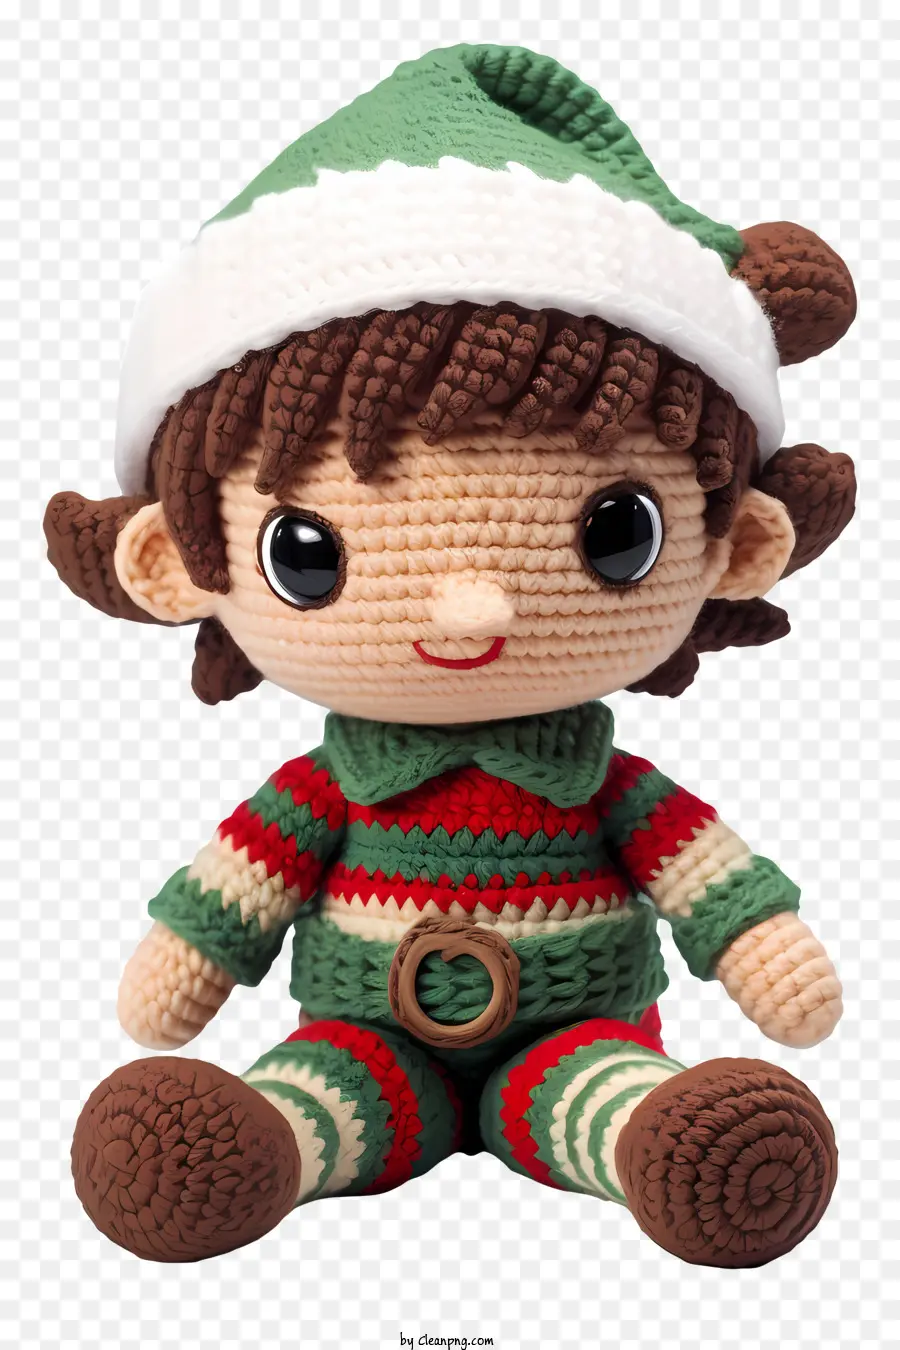 santa claus plush toy red and white hat green and white striped scarf green pants brown boots